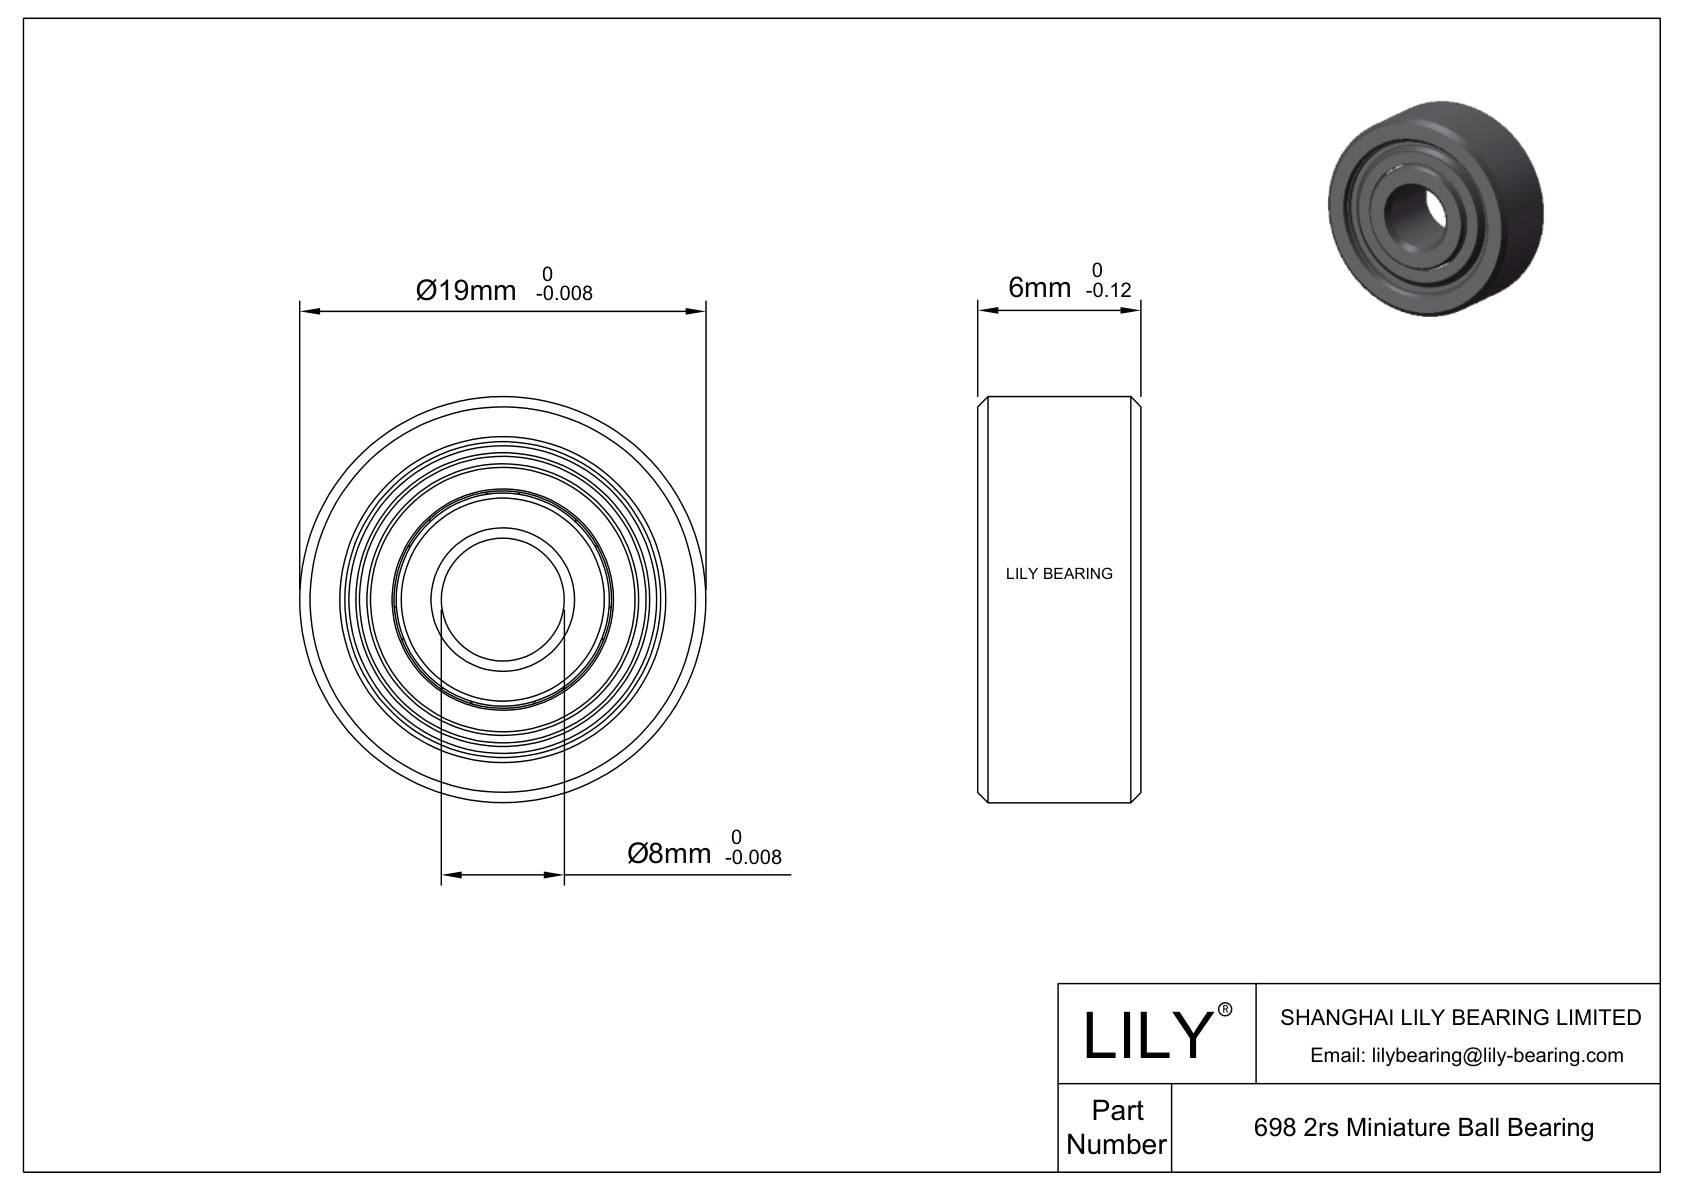 LILY-PUT69830-45 Outsourcing Polyurethane bearings cad drawing